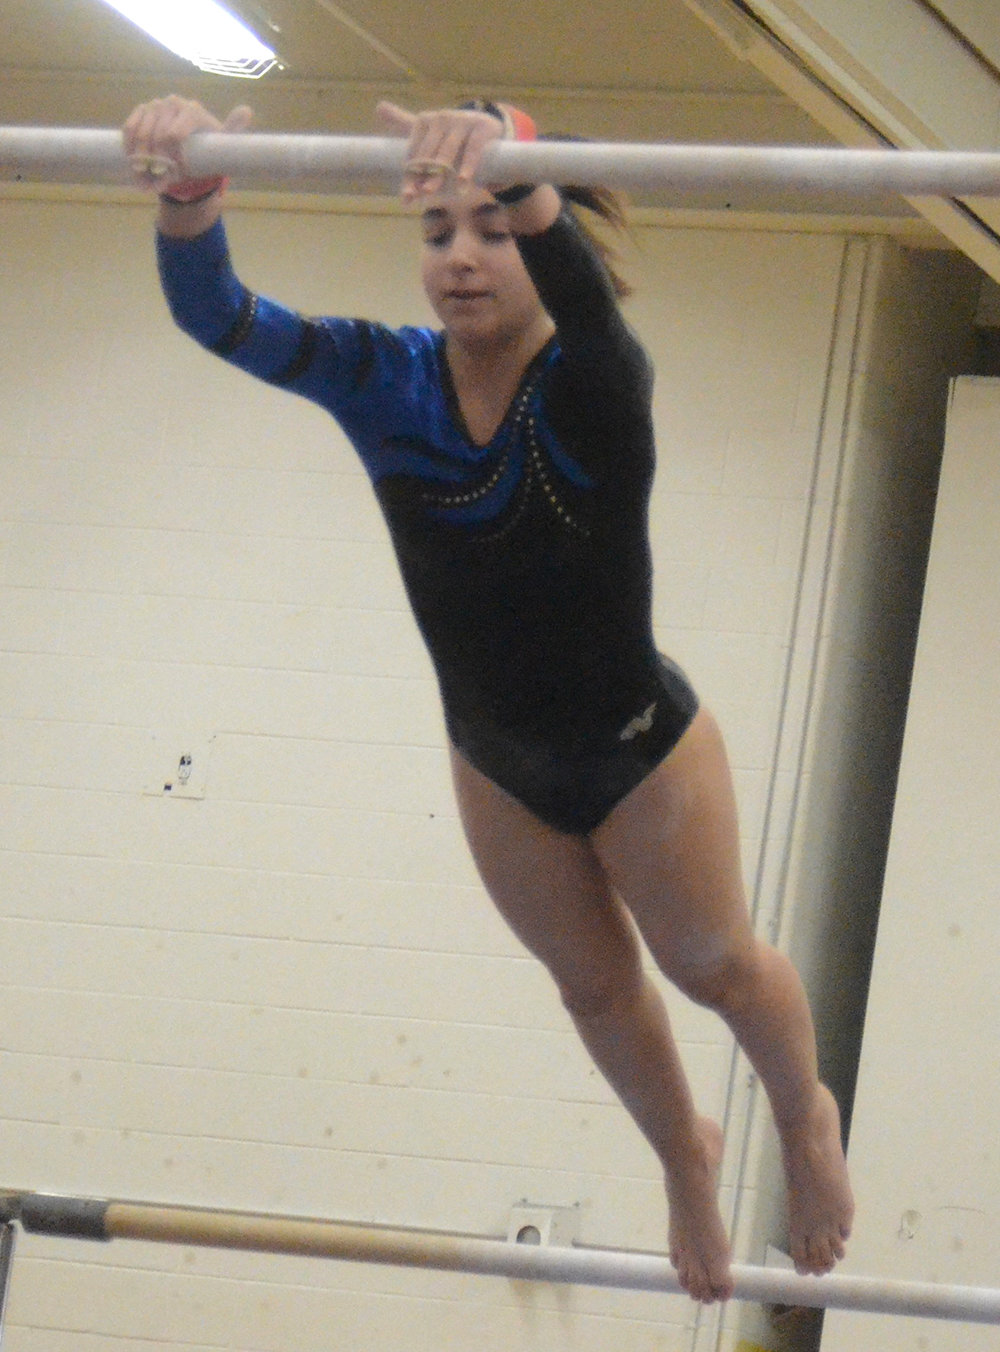 Wallkill’s Chloe Quattrochi performs on the uneven bars during the Section 9 gymnastic championship meet at Roosevelt High School in Hyde Park on Feb. 19, 2020.